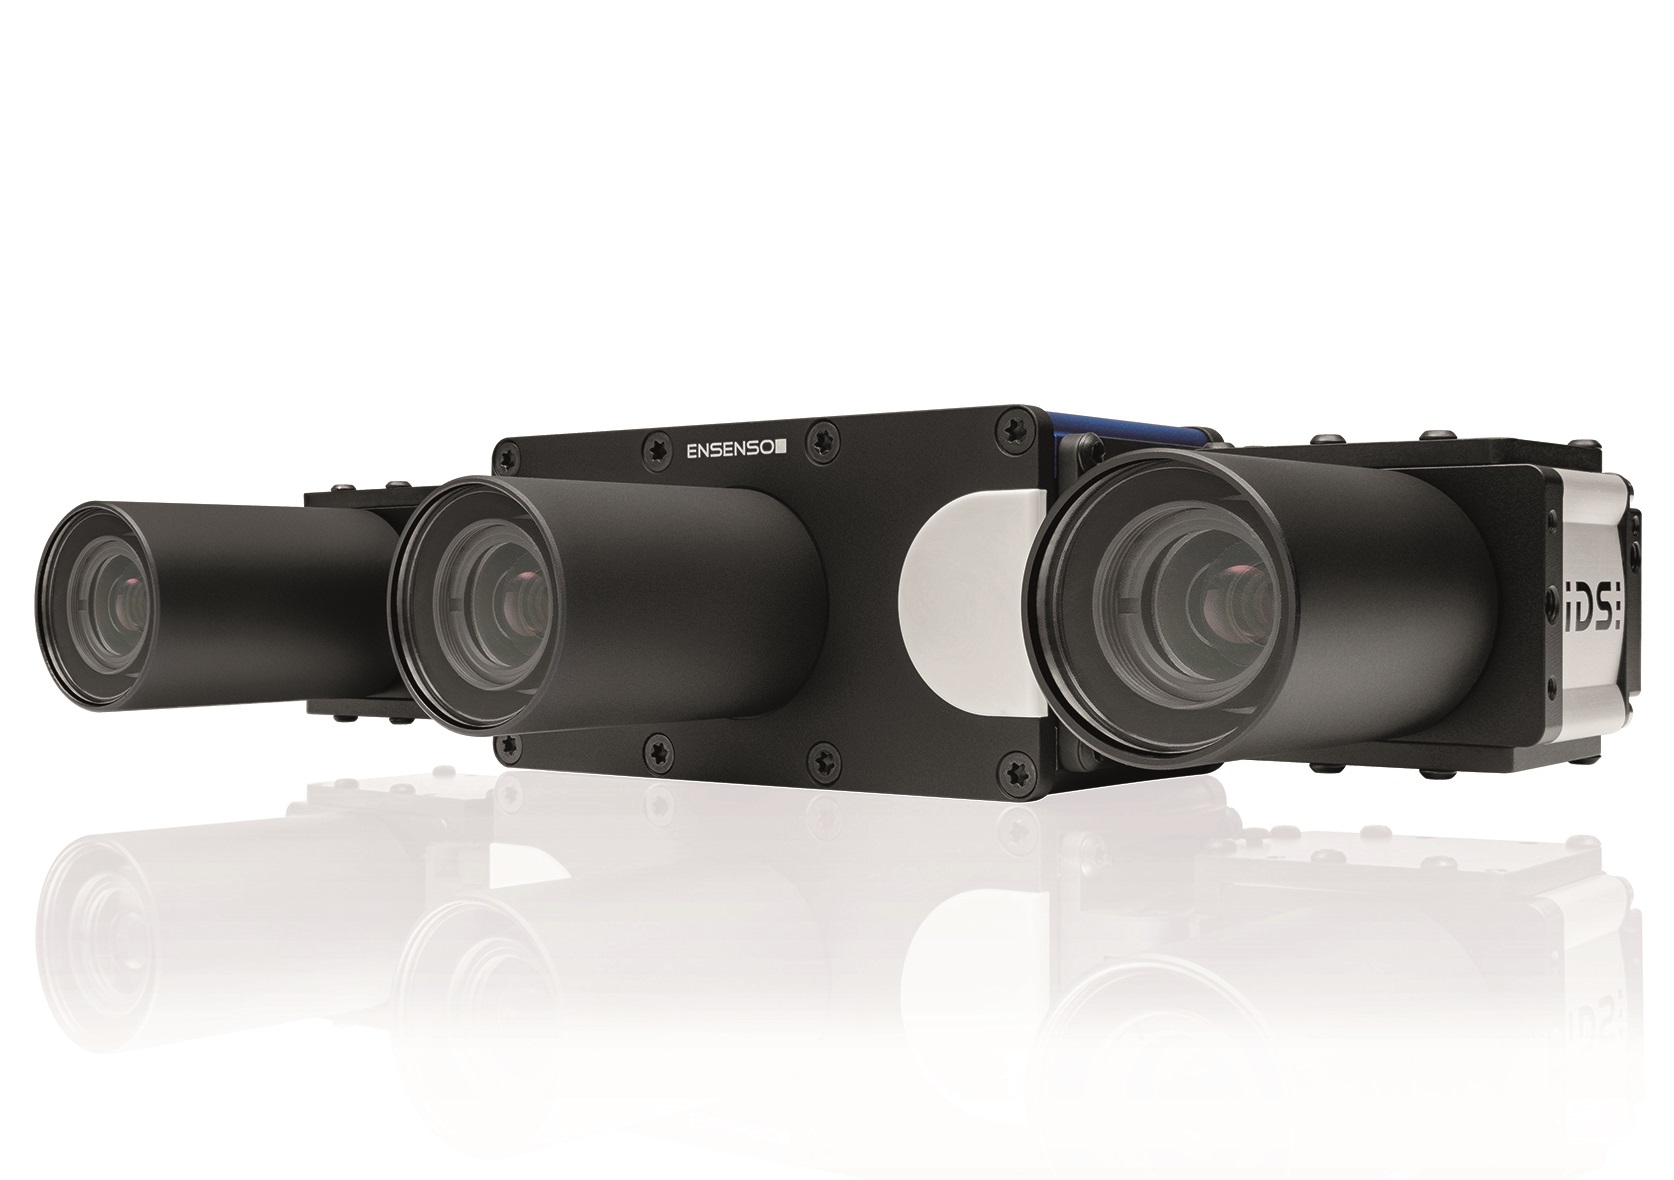 Ensenso XR: 3D camera with on-board processing